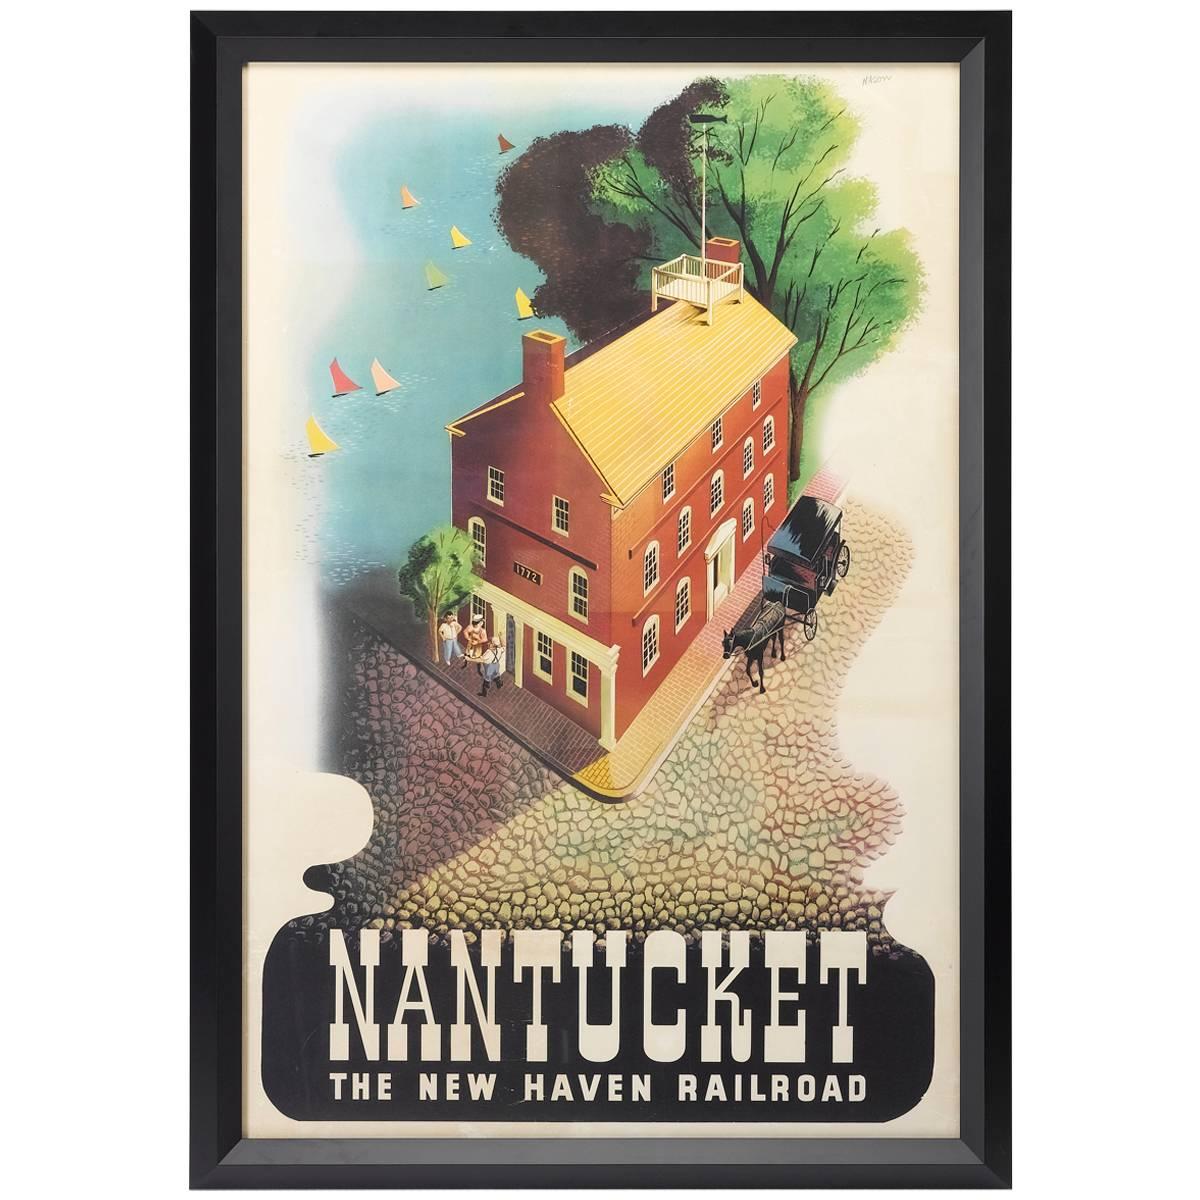 Nantucket Vintage Poster, First Edition, the New Haven Railroad, circa 1945